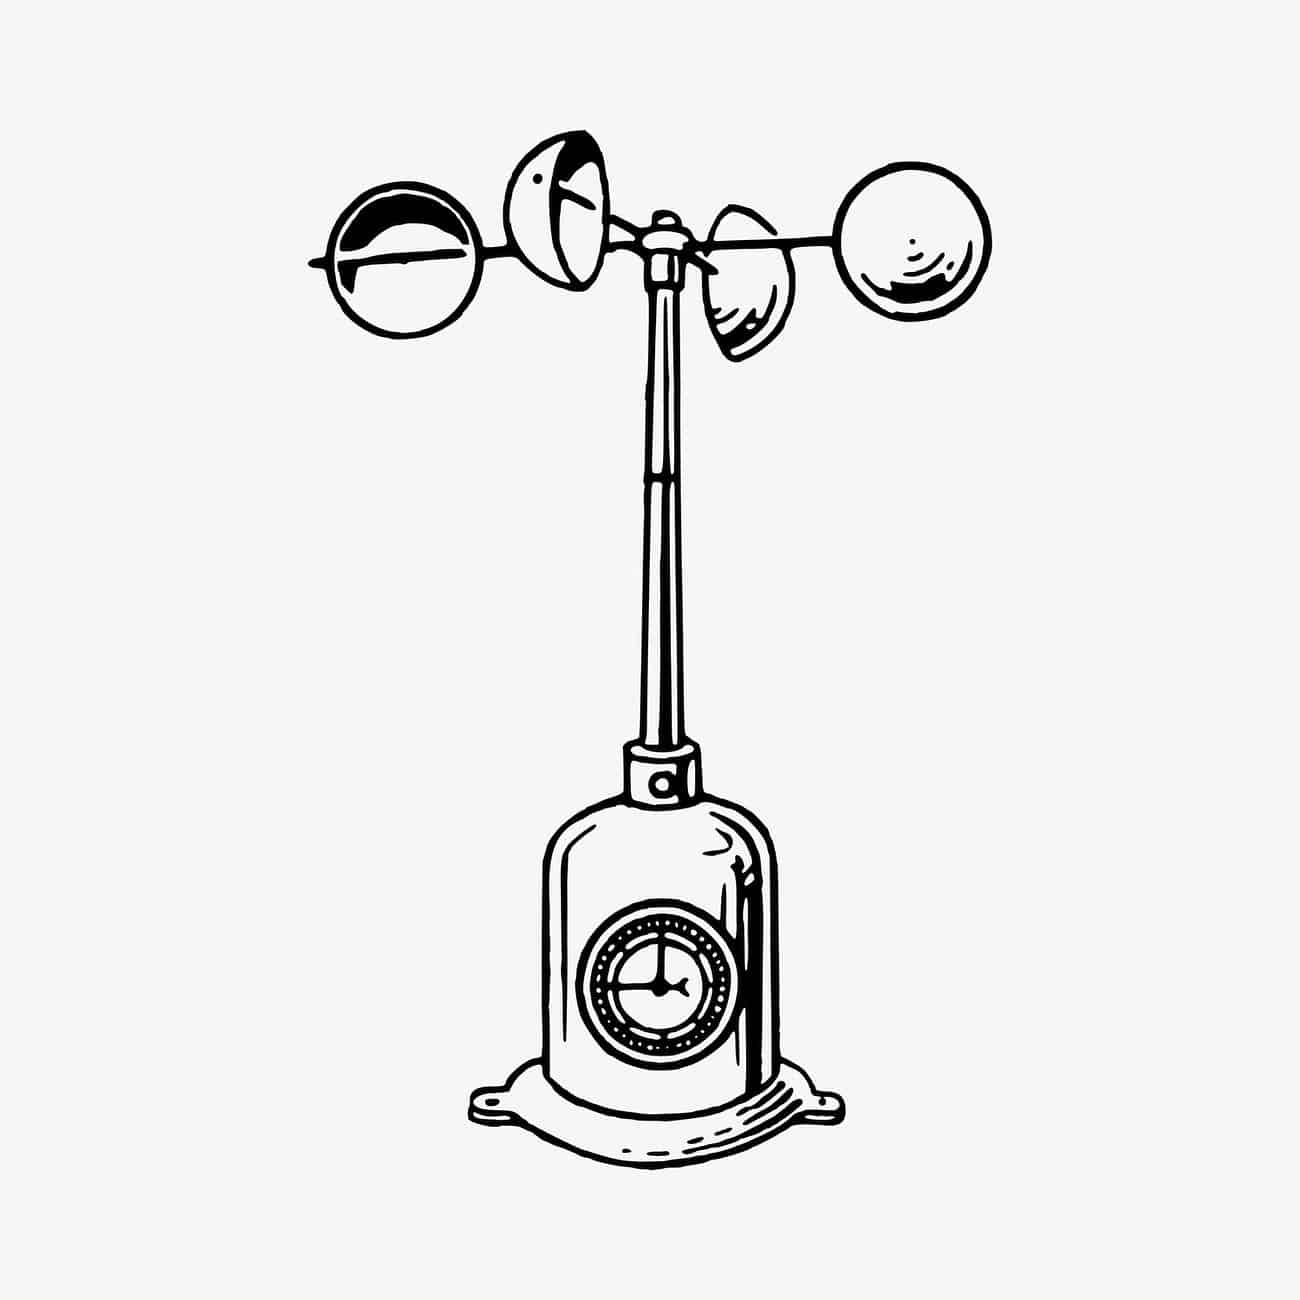 Anemometer clipart, vintage hand drawn